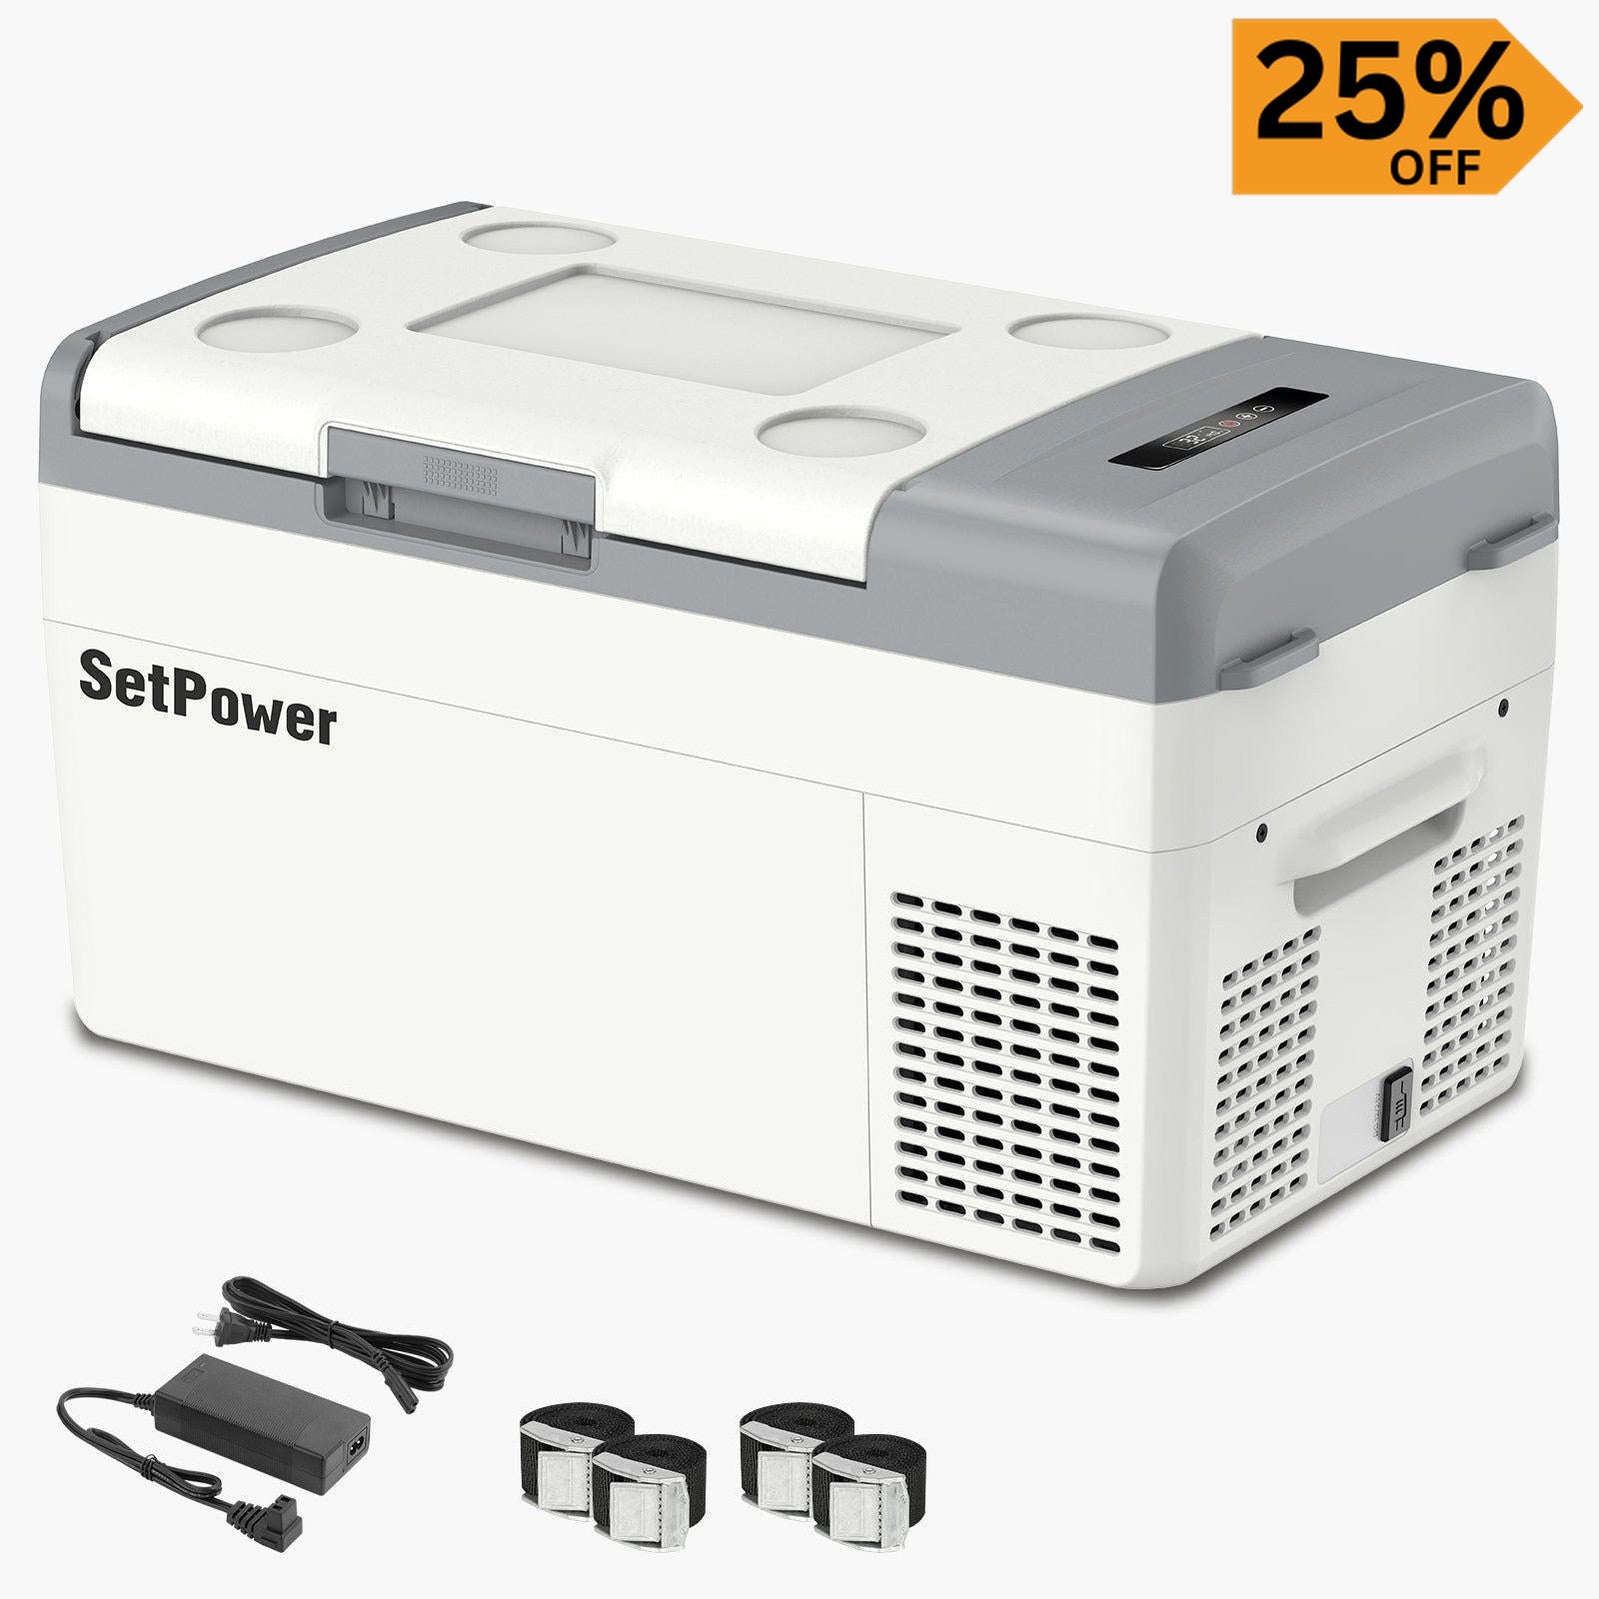 Setpower 21Qt FC20 12V Car Refrigerator With Free Gifts AC Adapter